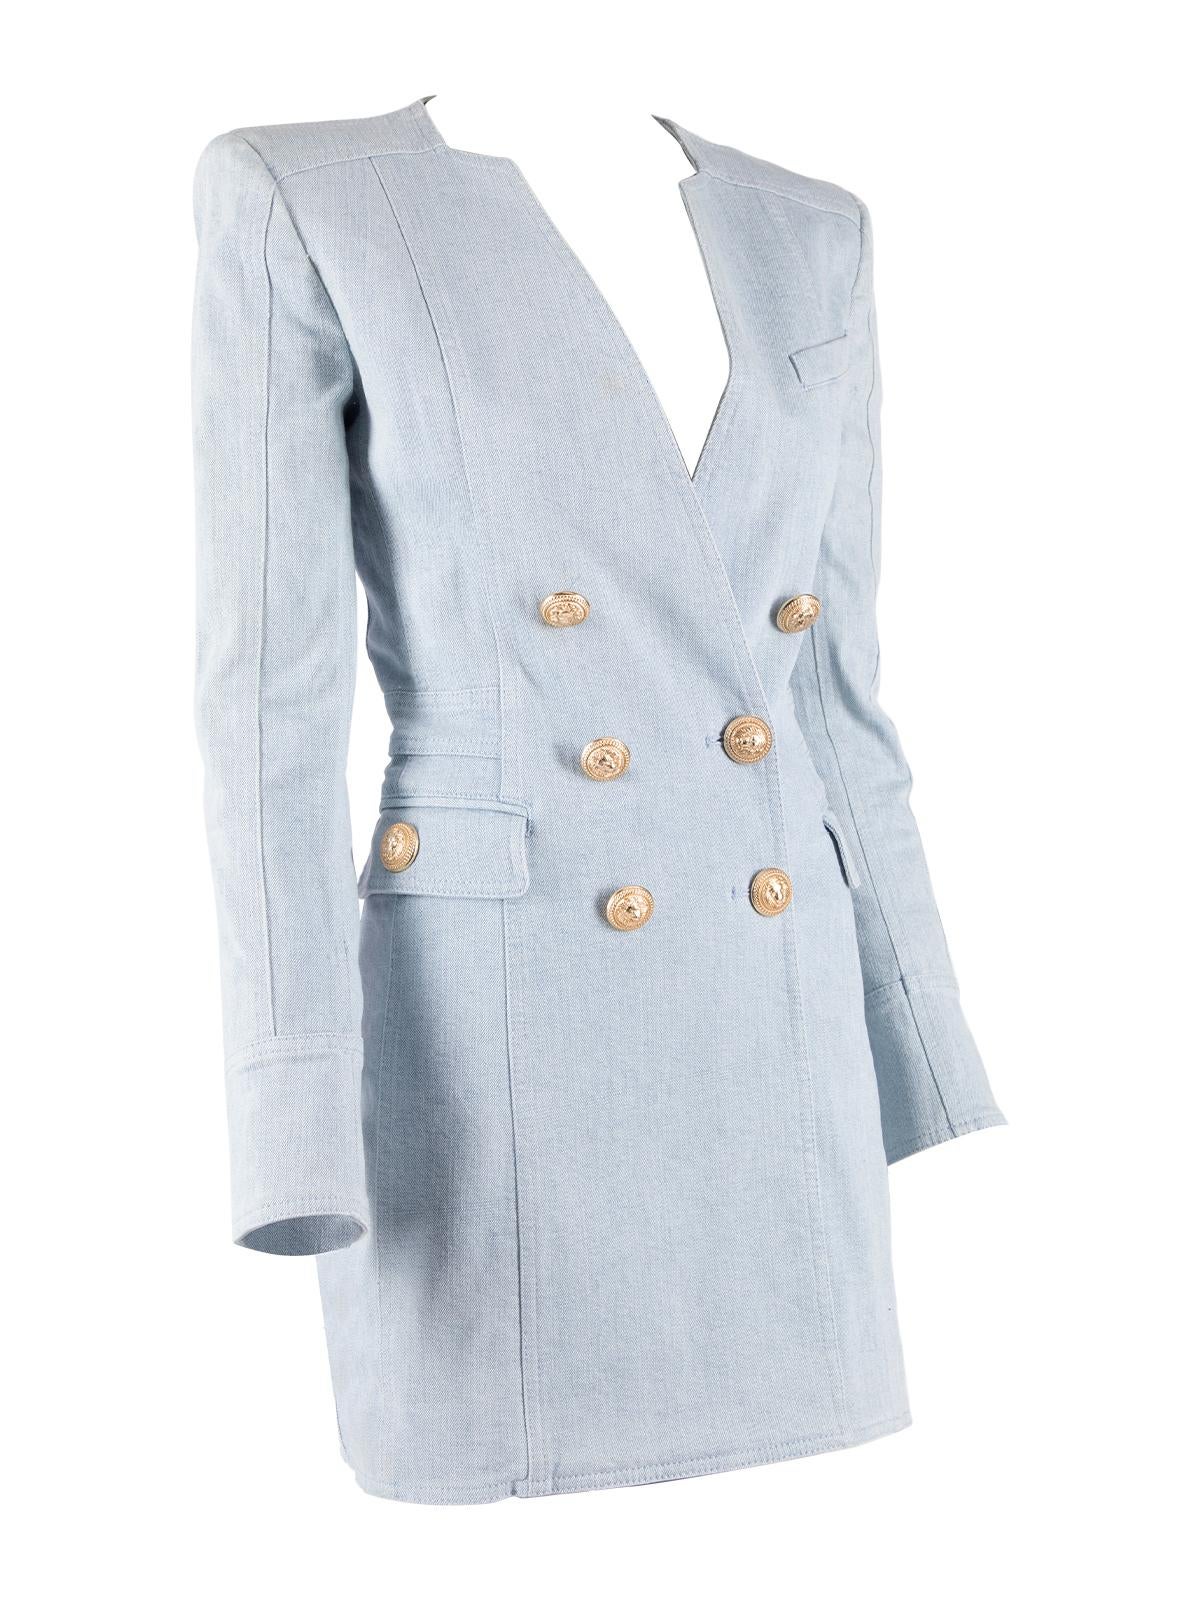 CONDITION is Very good. Hardly any visible wear to dress is evident on this used Balmain designer resale item. Details Blue Cotton Blazer dress Form fitting Long sleeve Denim V-neck 2x exterior pockets Front button and back zipper fastening Made in